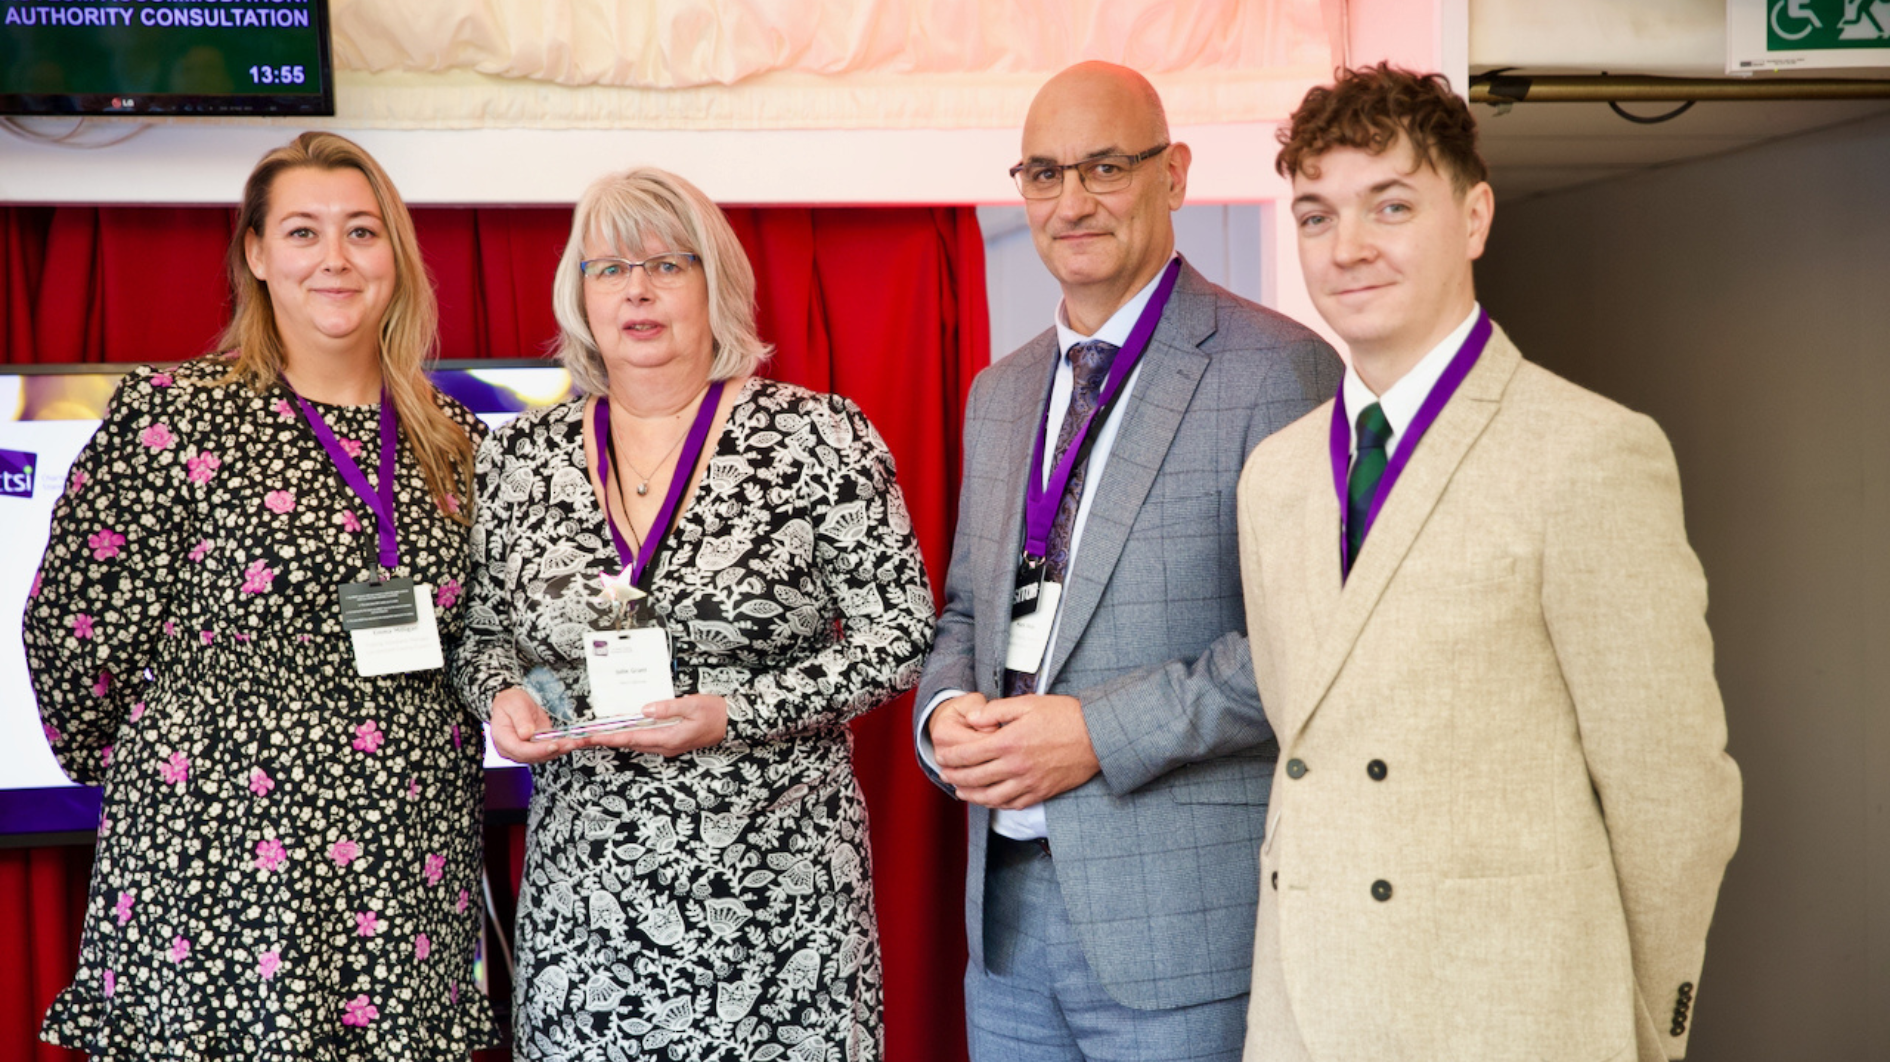 Two women stood sided by side wearing a purple lanyard and two men to the right wearing purple lanyards all wearing formal clothing at an awards ceremony